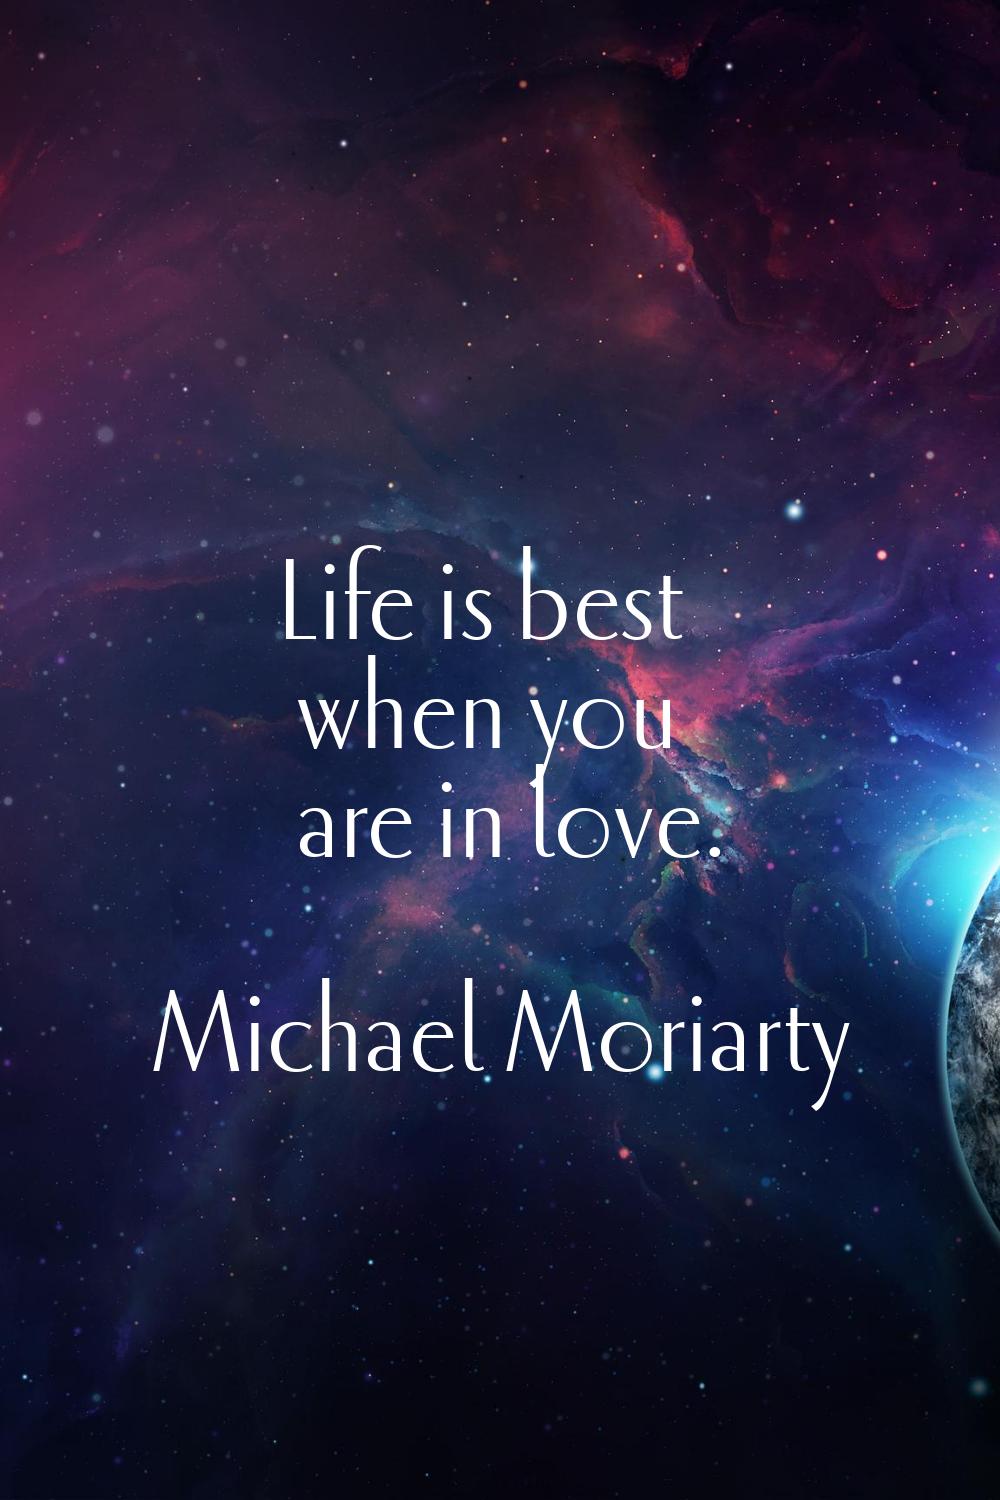 Life is best when you are in love.